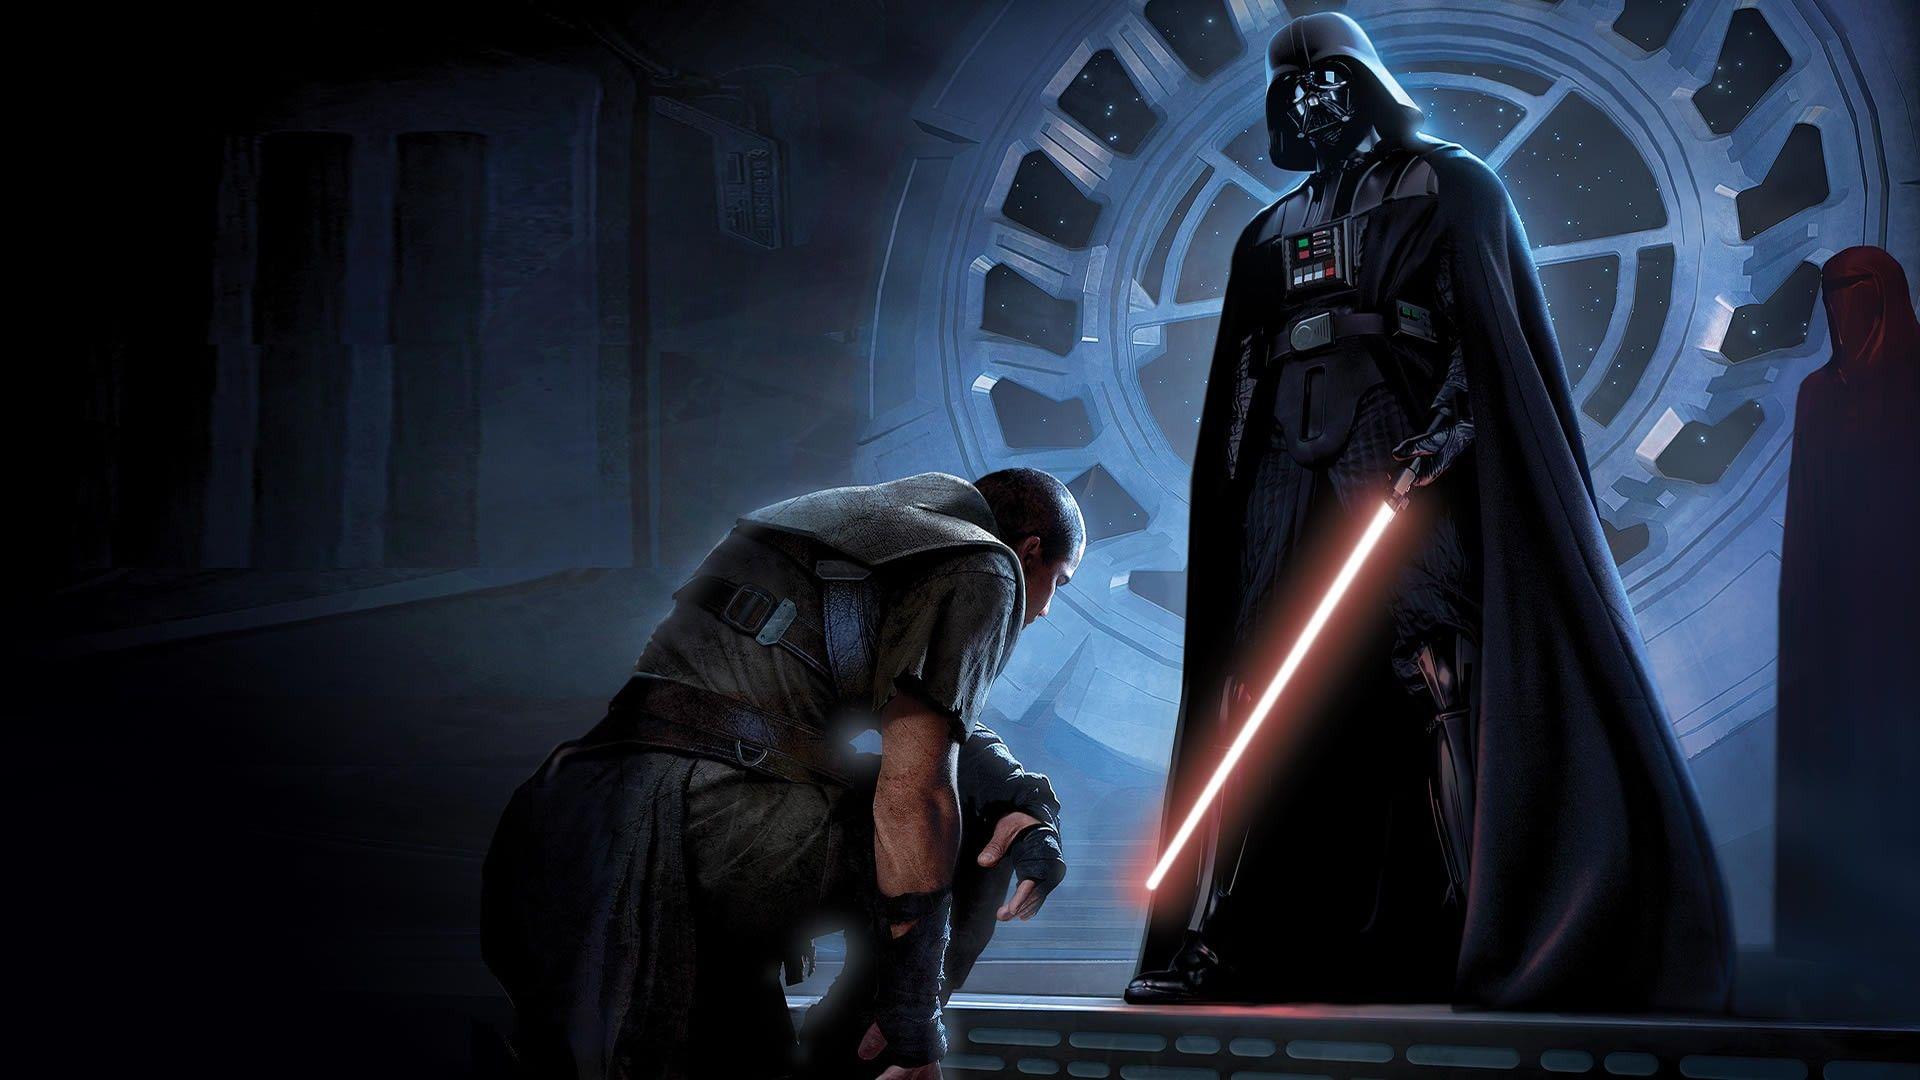 Star Wars wallpaper HDDownload free awesome wallpaper